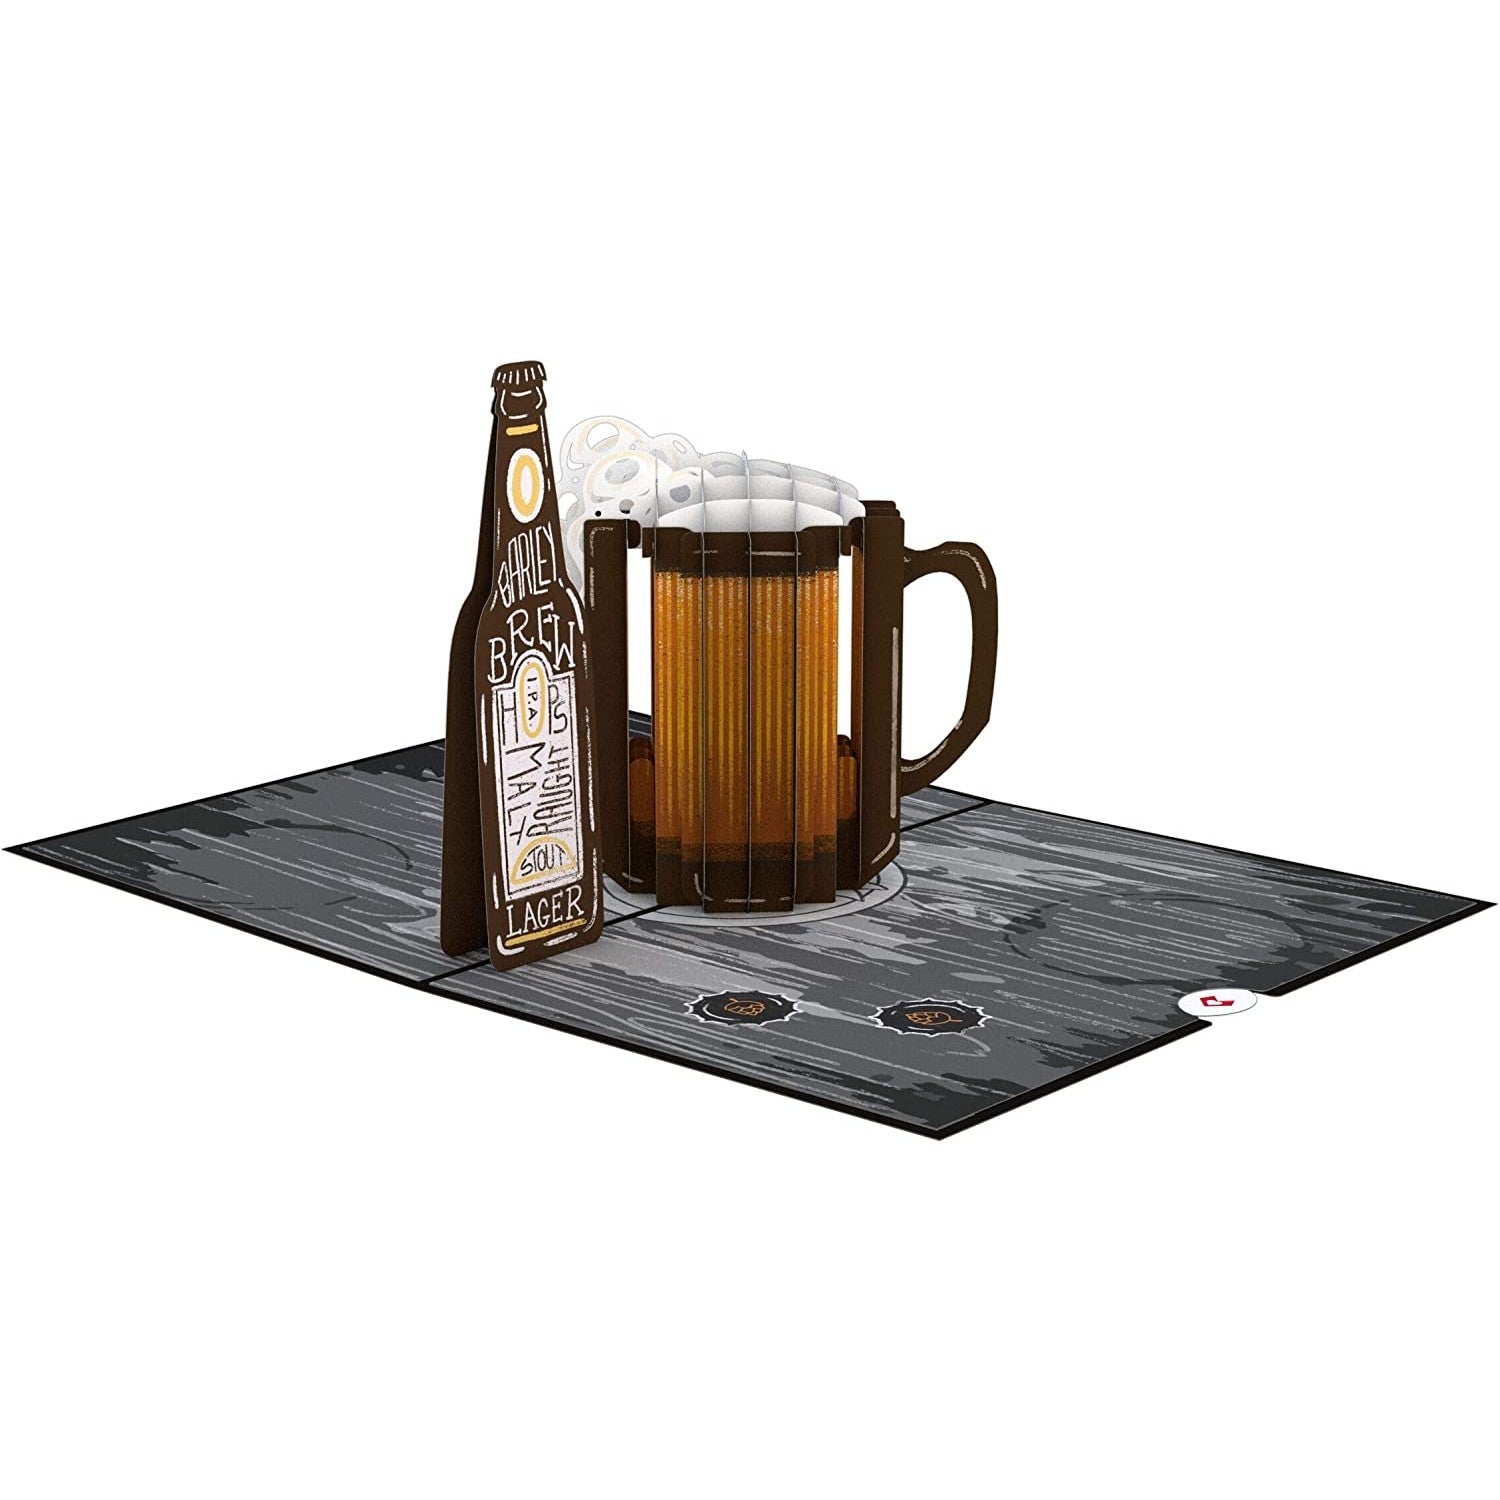 A 3D pop-up greeting card featuring a beer bottle and a beer stein.